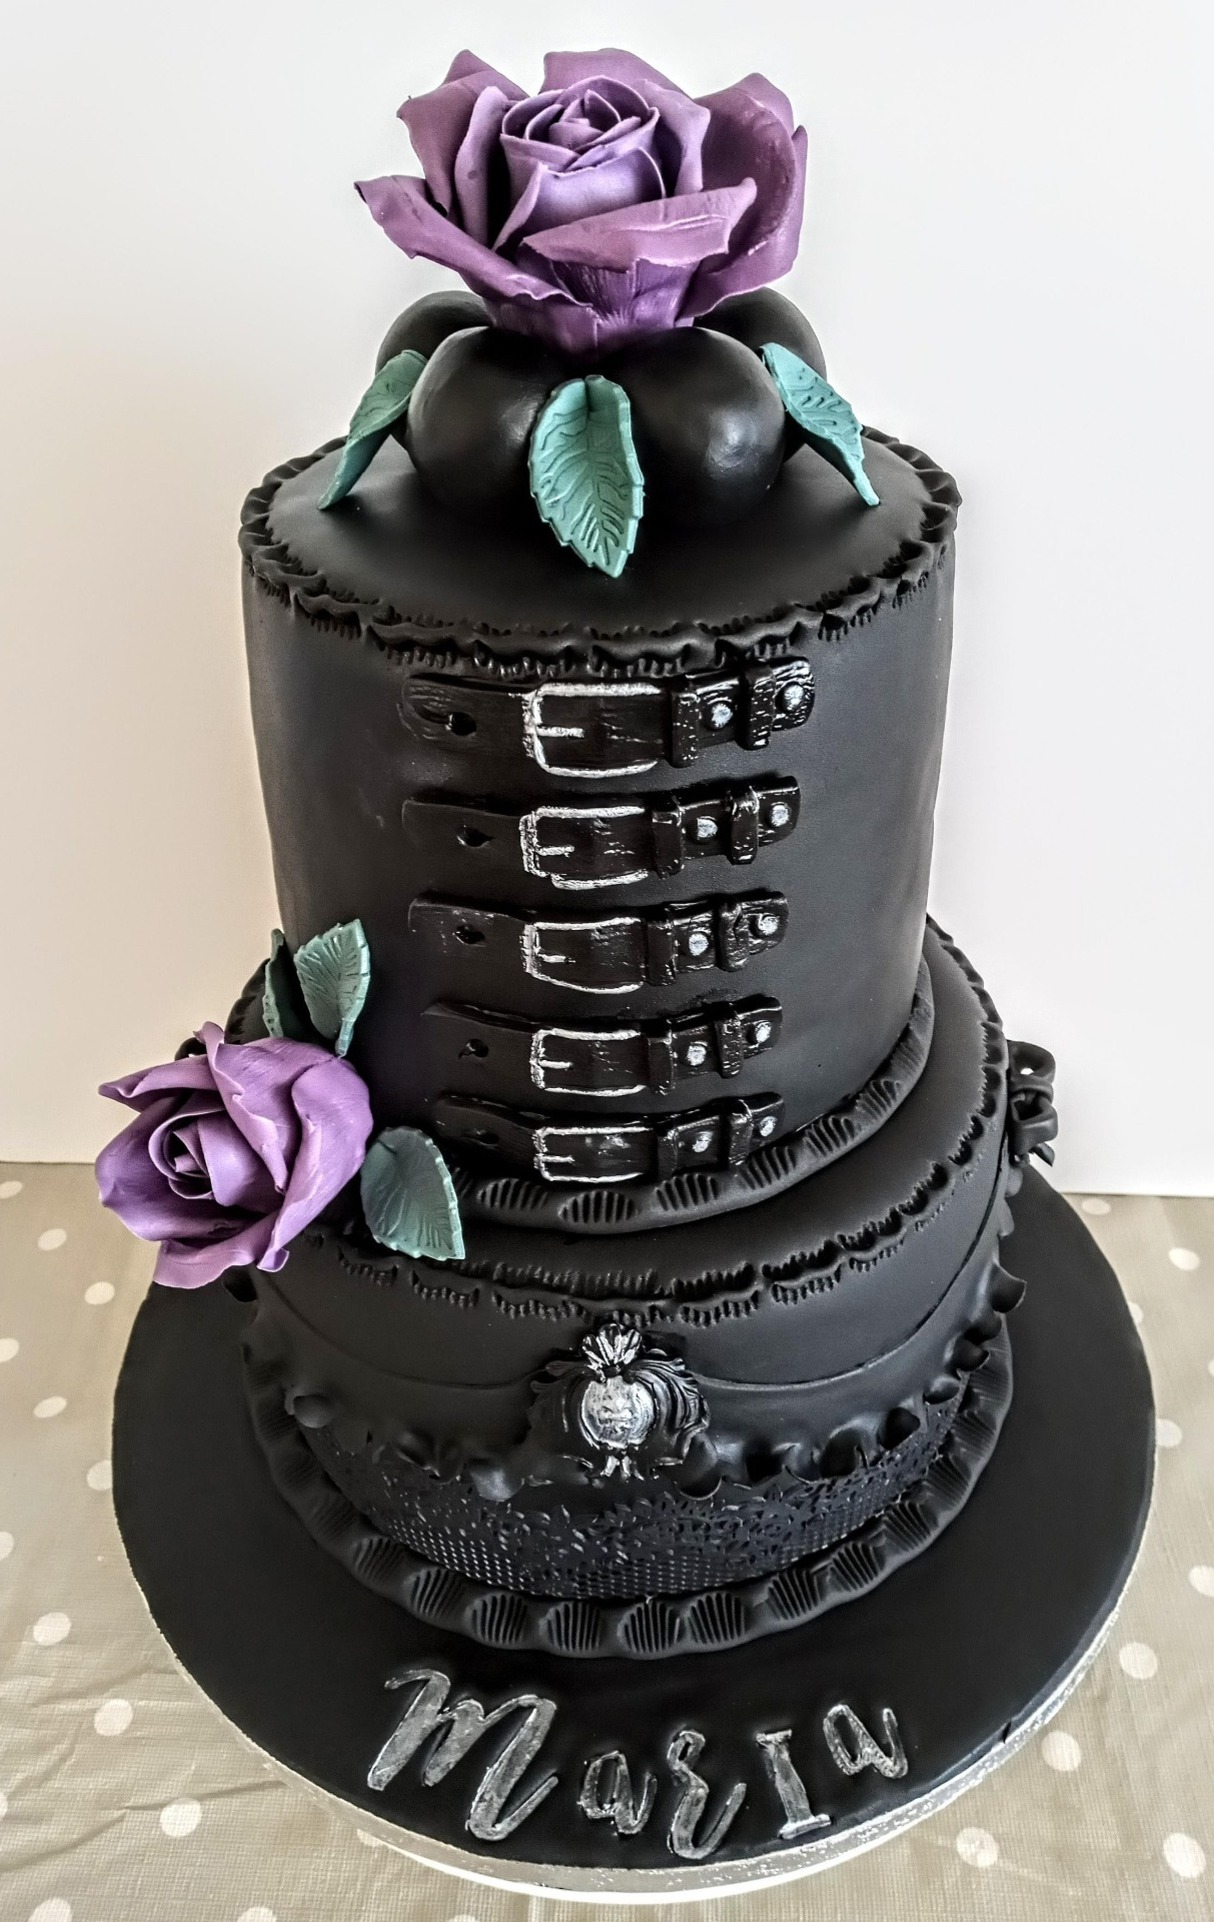 "Gothic" inspired 2 tier cake with purple sugar roses